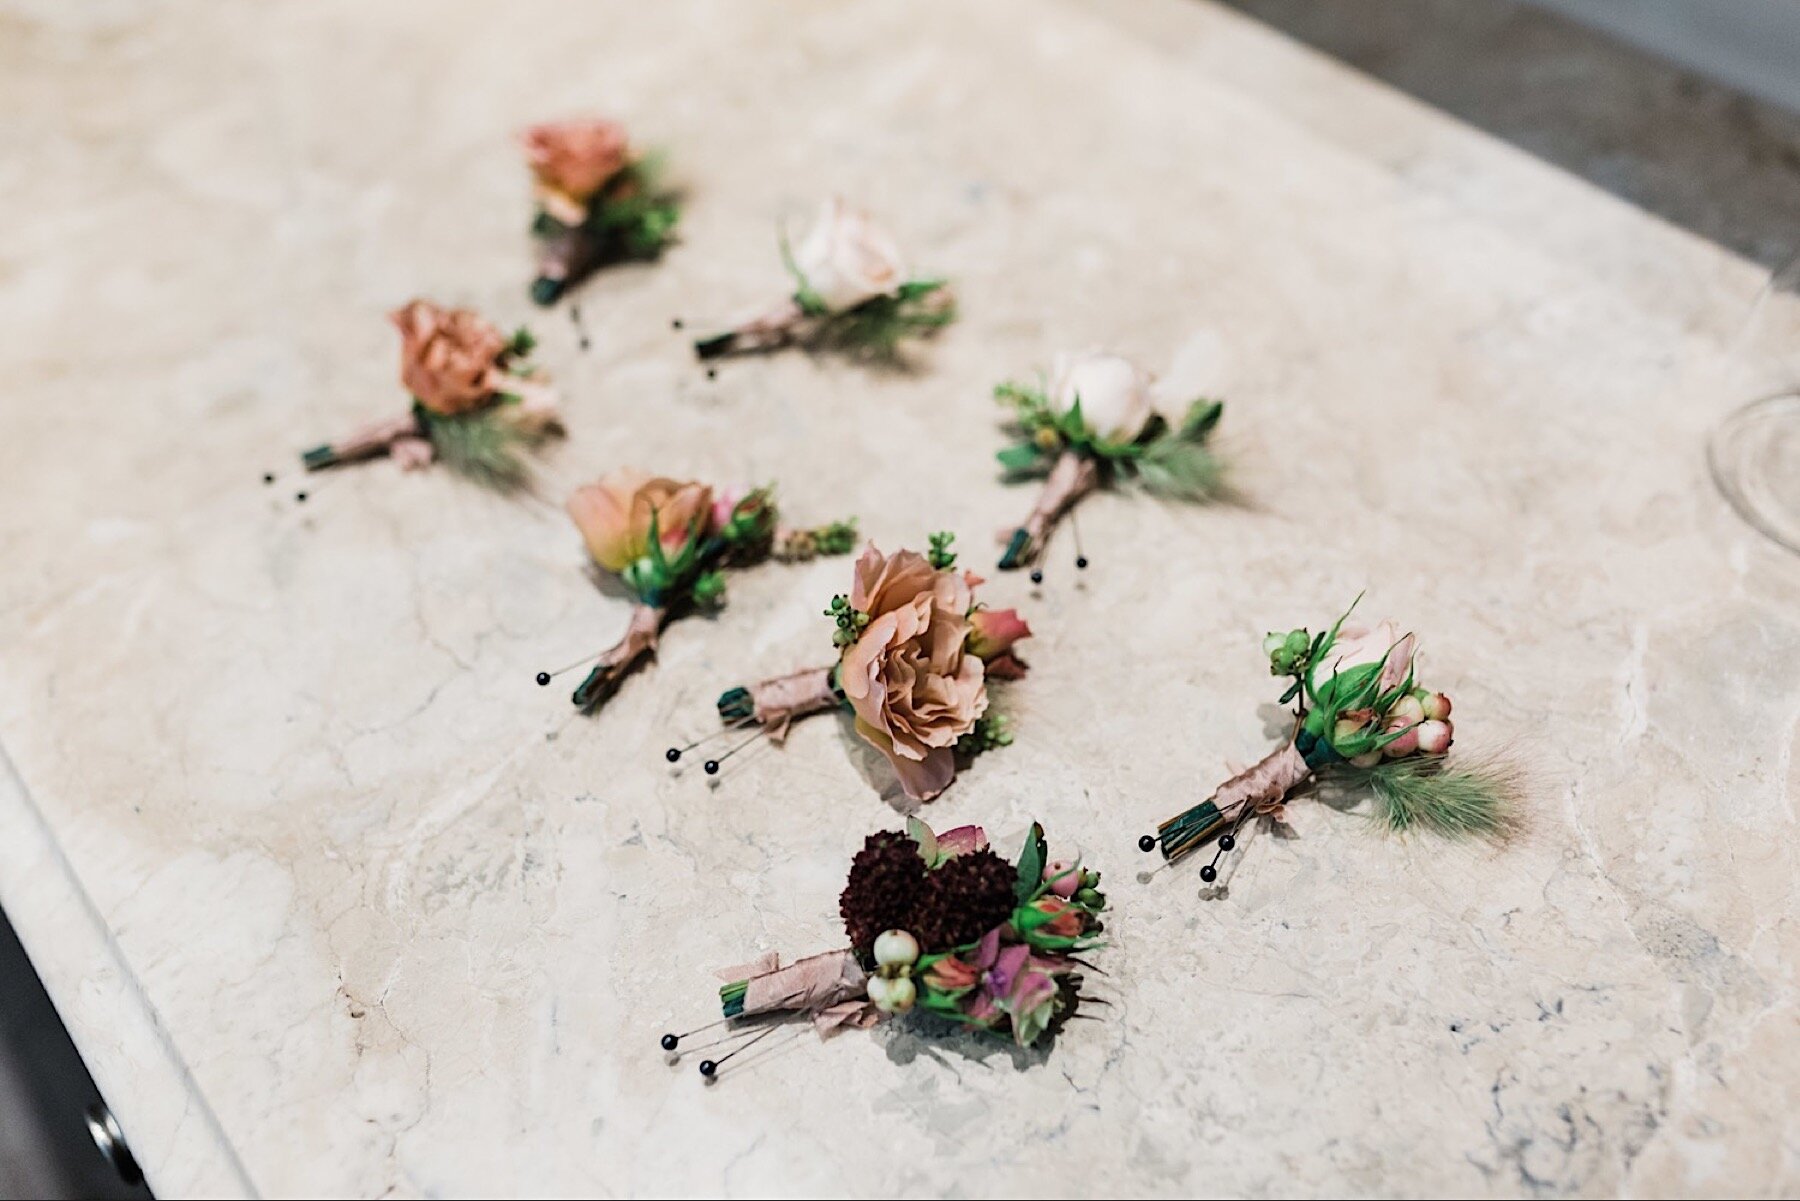 07_shaxton-ngo-060_A_Woodmark_floral_top_with_Florist_Gather_Design_from_Company_at_romantic_the_wedding_lush_Seattle_Wedding_design_Hotel.jpg